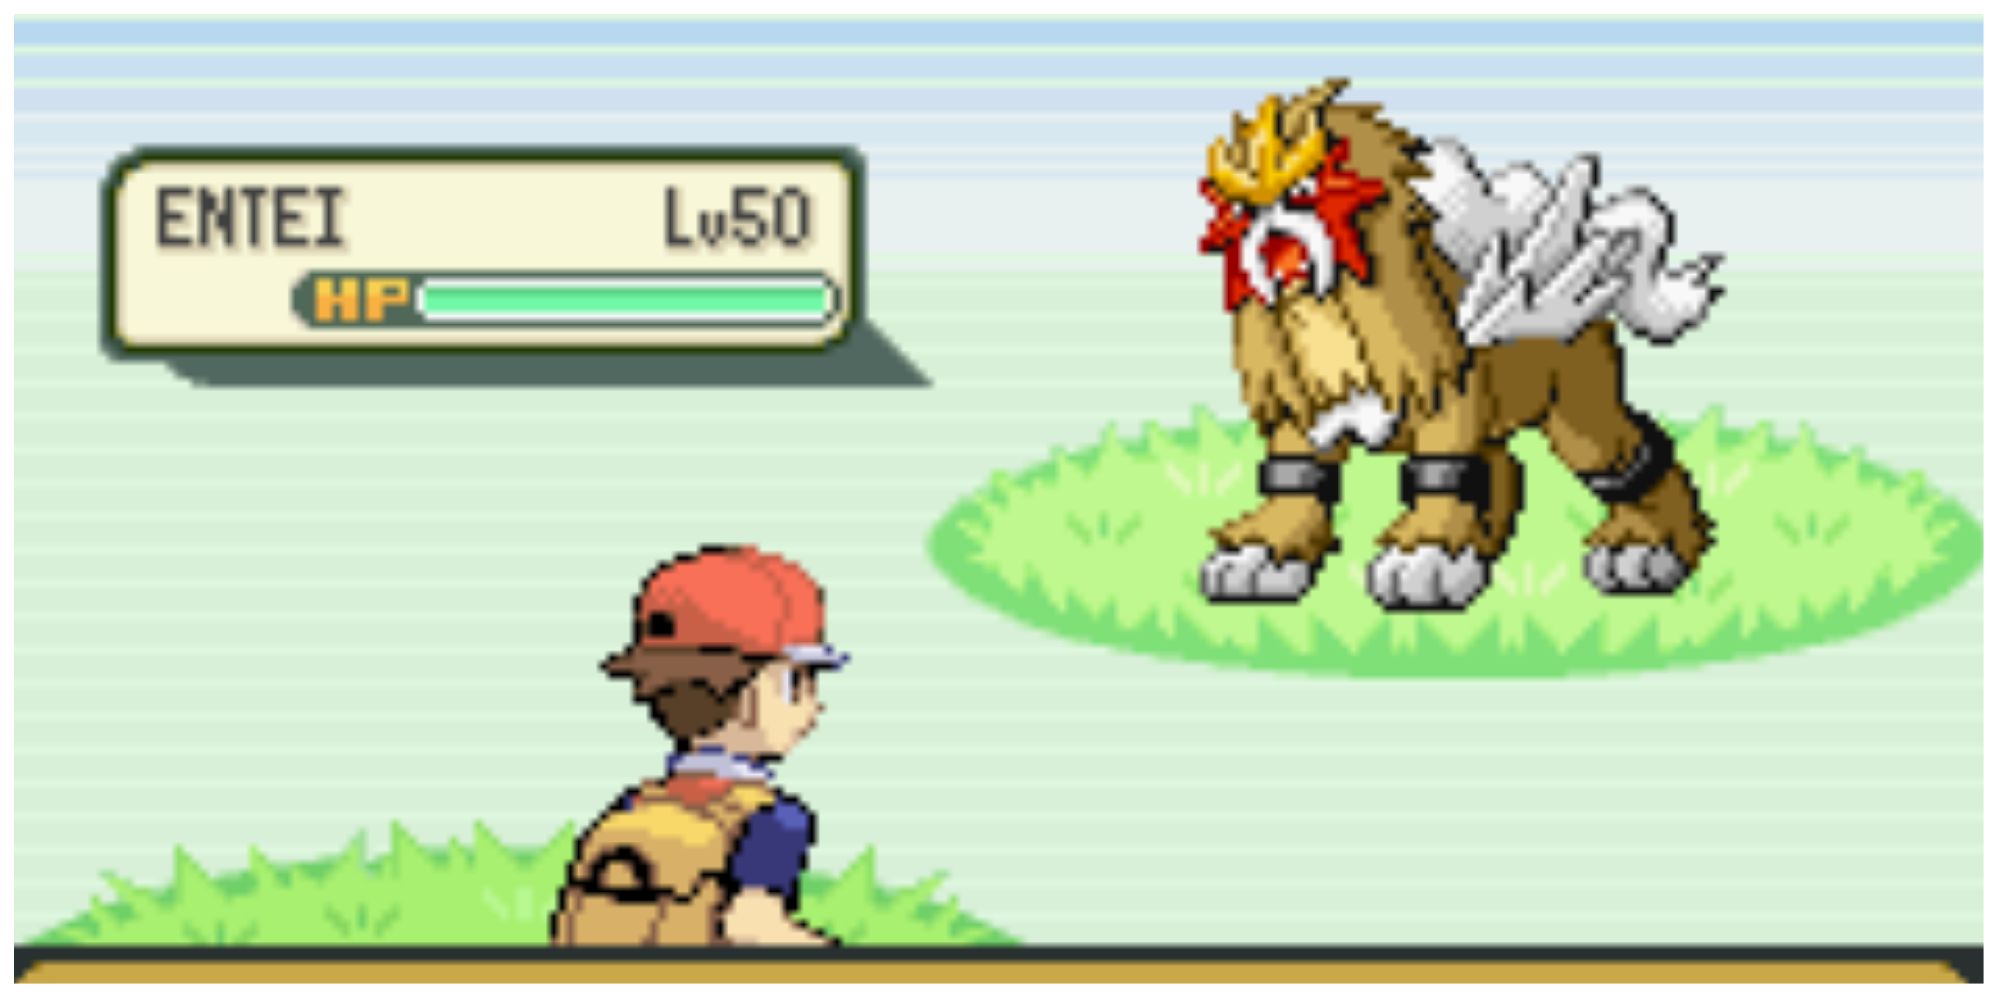 Entei in Pokemon Fire Red and Leaf Green